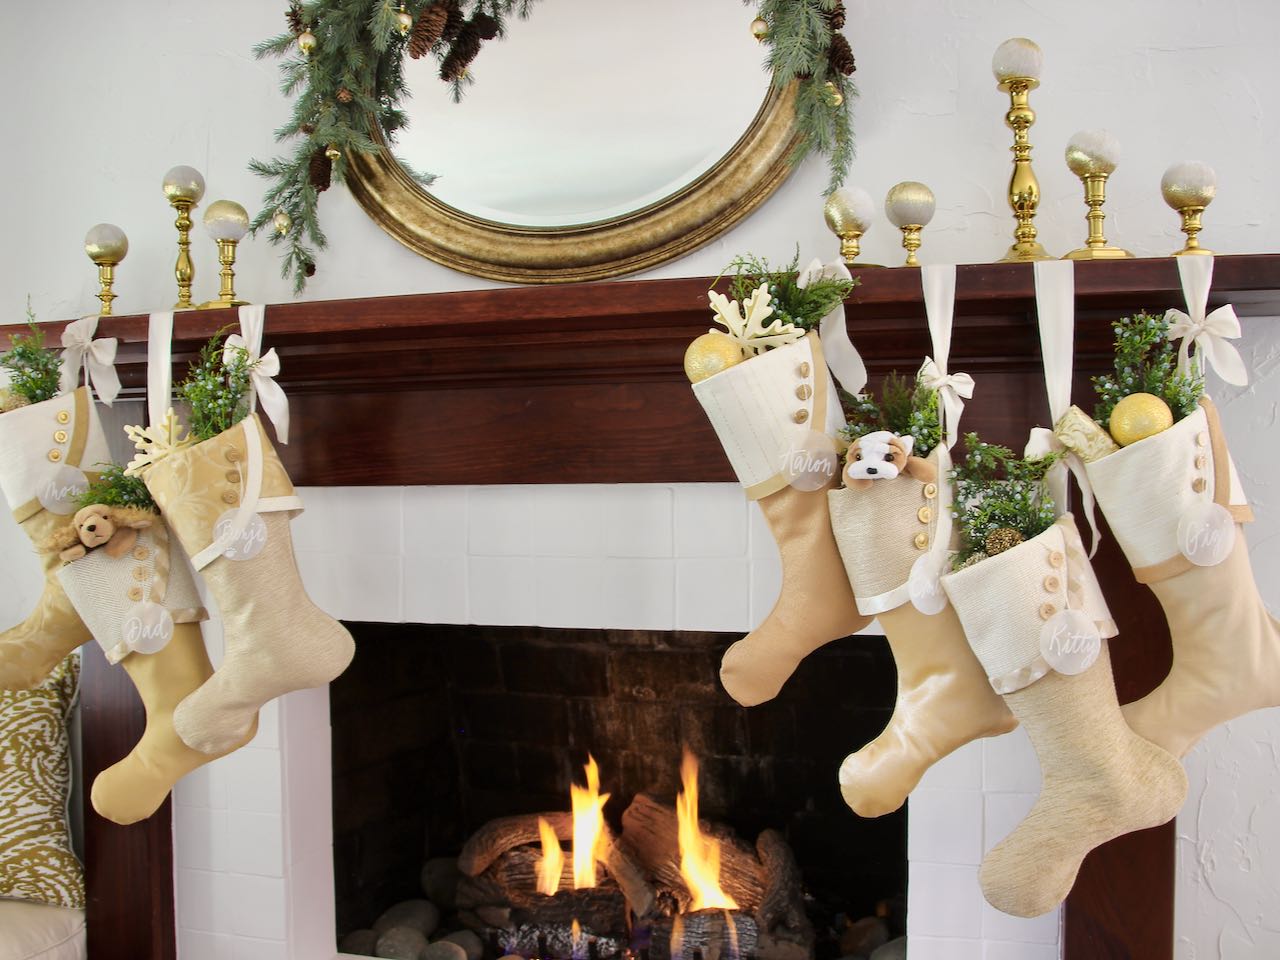 7 coordinating Christmas stockings with capiz shell name tags flanking a fireplace